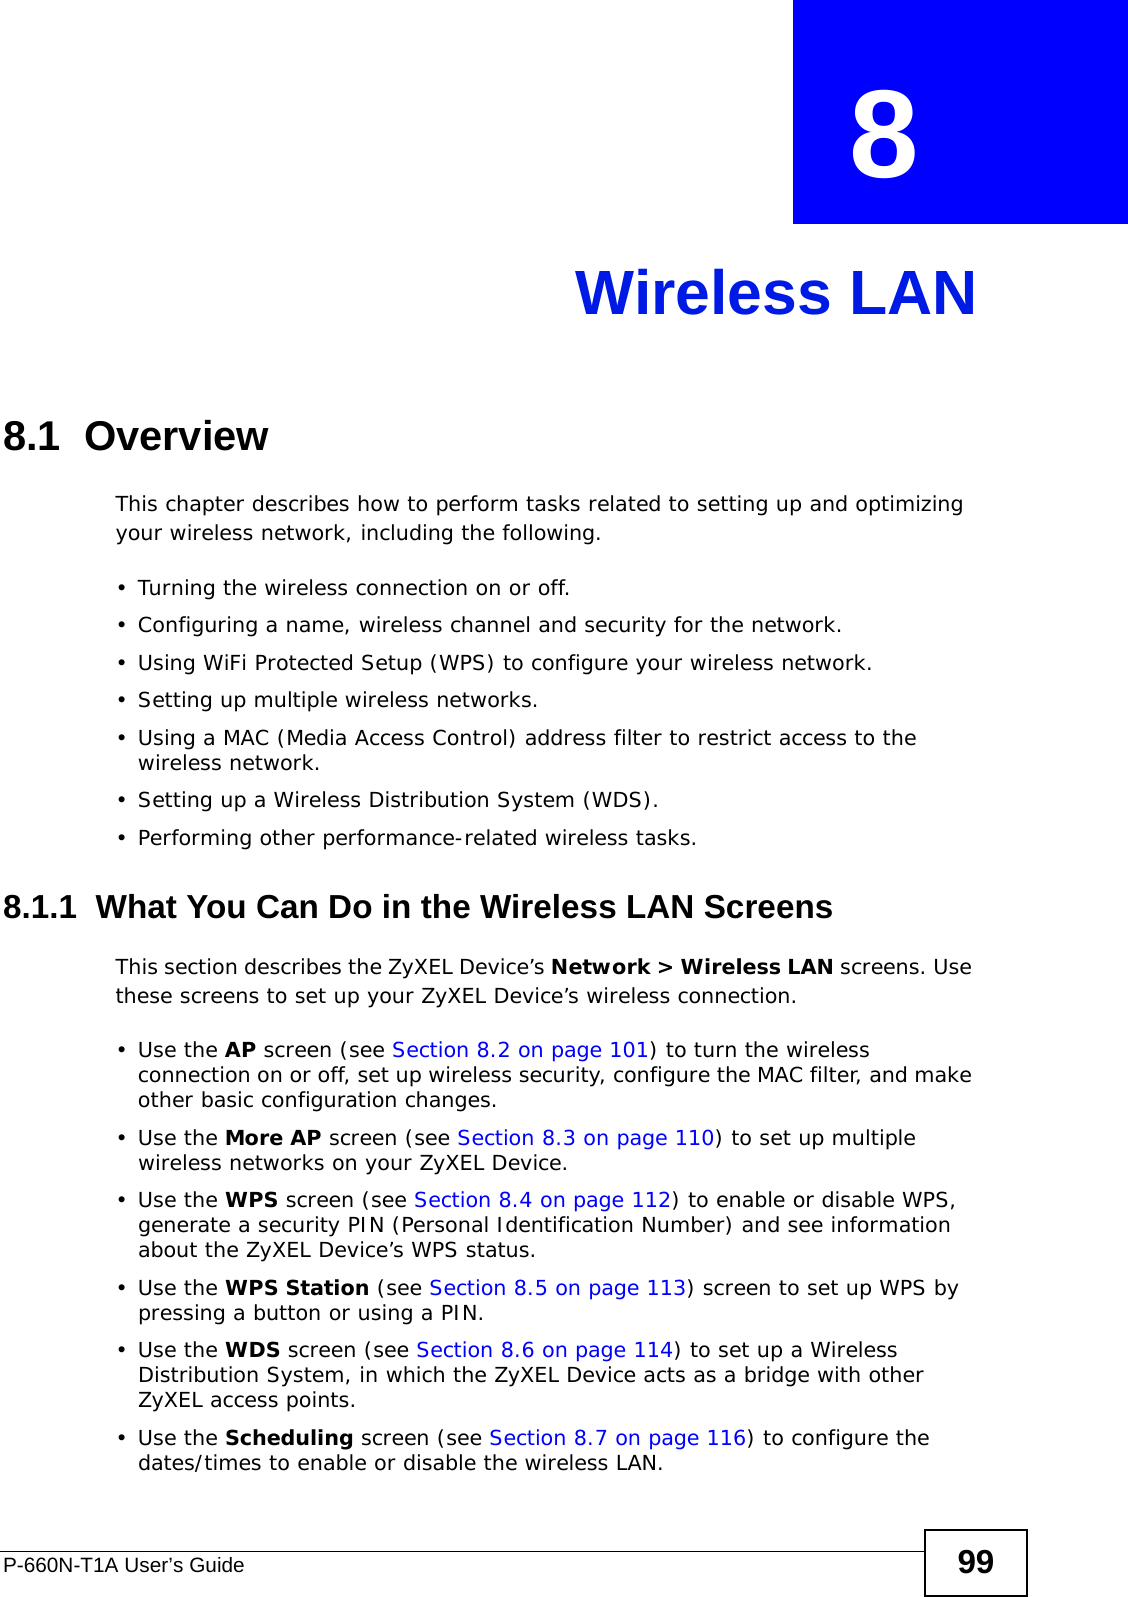 P-660N-T1A User’s Guide 99CHAPTER  8 Wireless LAN8.1  Overview This chapter describes how to perform tasks related to setting up and optimizing your wireless network, including the following.• Turning the wireless connection on or off.• Configuring a name, wireless channel and security for the network.• Using WiFi Protected Setup (WPS) to configure your wireless network.• Setting up multiple wireless networks.• Using a MAC (Media Access Control) address filter to restrict access to the wireless network.• Setting up a Wireless Distribution System (WDS).• Performing other performance-related wireless tasks.8.1.1  What You Can Do in the Wireless LAN ScreensThis section describes the ZyXEL Device’s Network &gt; Wireless LAN screens. Use these screens to set up your ZyXEL Device’s wireless connection.•Use the AP screen (see Section 8.2 on page 101) to turn the wireless connection on or off, set up wireless security, configure the MAC filter, and make other basic configuration changes.•Use the More AP screen (see Section 8.3 on page 110) to set up multiple wireless networks on your ZyXEL Device.•Use the WPS screen (see Section 8.4 on page 112) to enable or disable WPS, generate a security PIN (Personal Identification Number) and see information about the ZyXEL Device’s WPS status.•Use the WPS Station (see Section 8.5 on page 113) screen to set up WPS by pressing a button or using a PIN.•Use the WDS screen (see Section 8.6 on page 114) to set up a Wireless Distribution System, in which the ZyXEL Device acts as a bridge with other ZyXEL access points.•Use the Scheduling screen (see Section 8.7 on page 116) to configure the dates/times to enable or disable the wireless LAN.